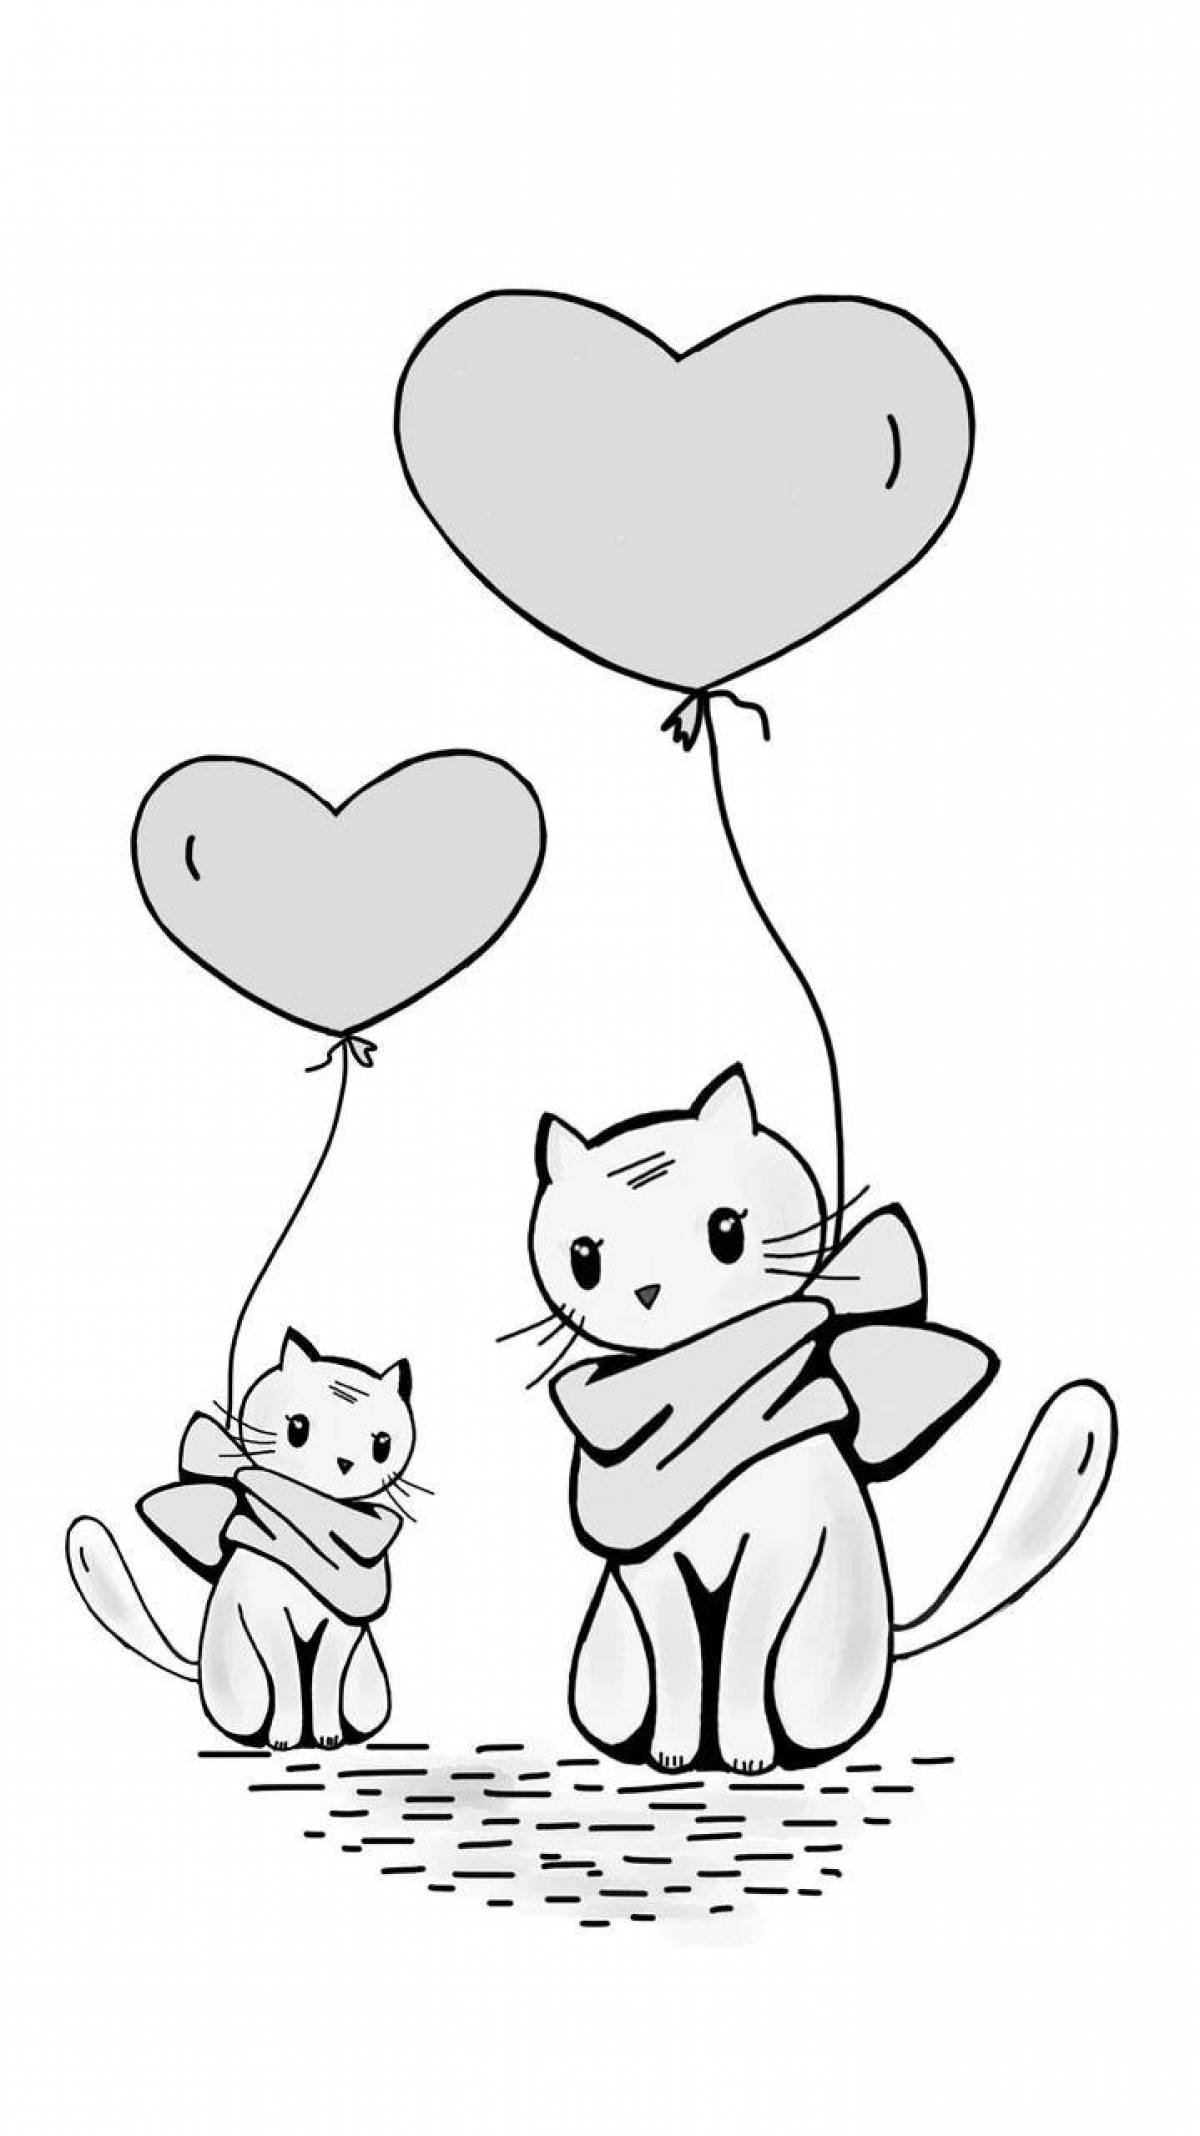 Bubble cat with balloons